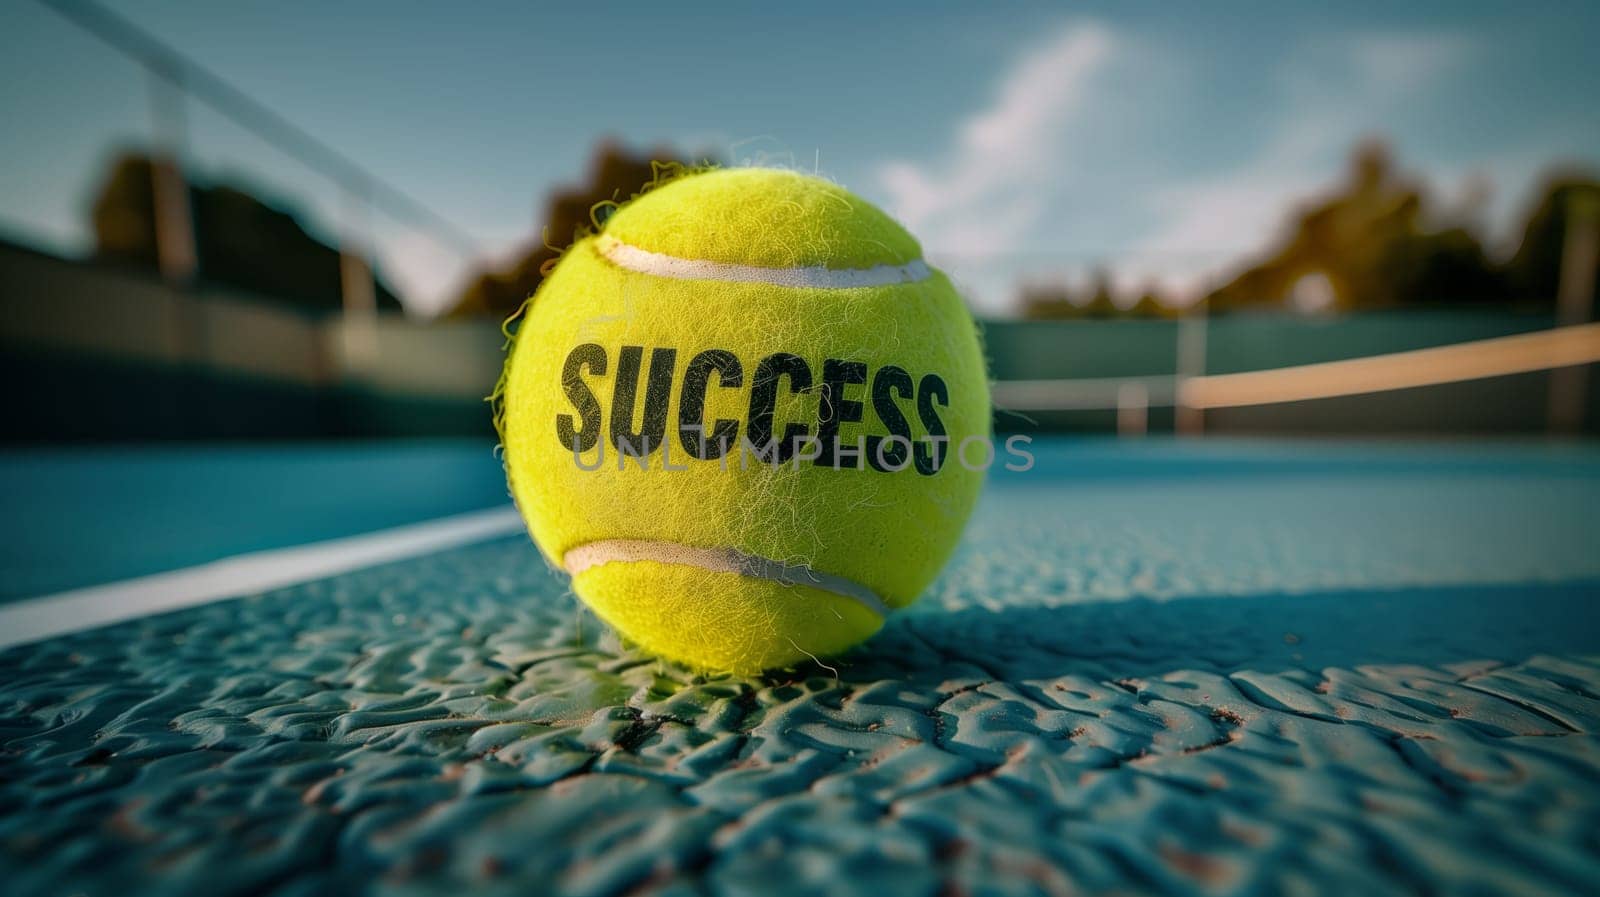 A tennis ball with the word success written on it sits on the grass court under the blue sky with fluffy clouds. The sports equipment stands out against the natural world backdrop